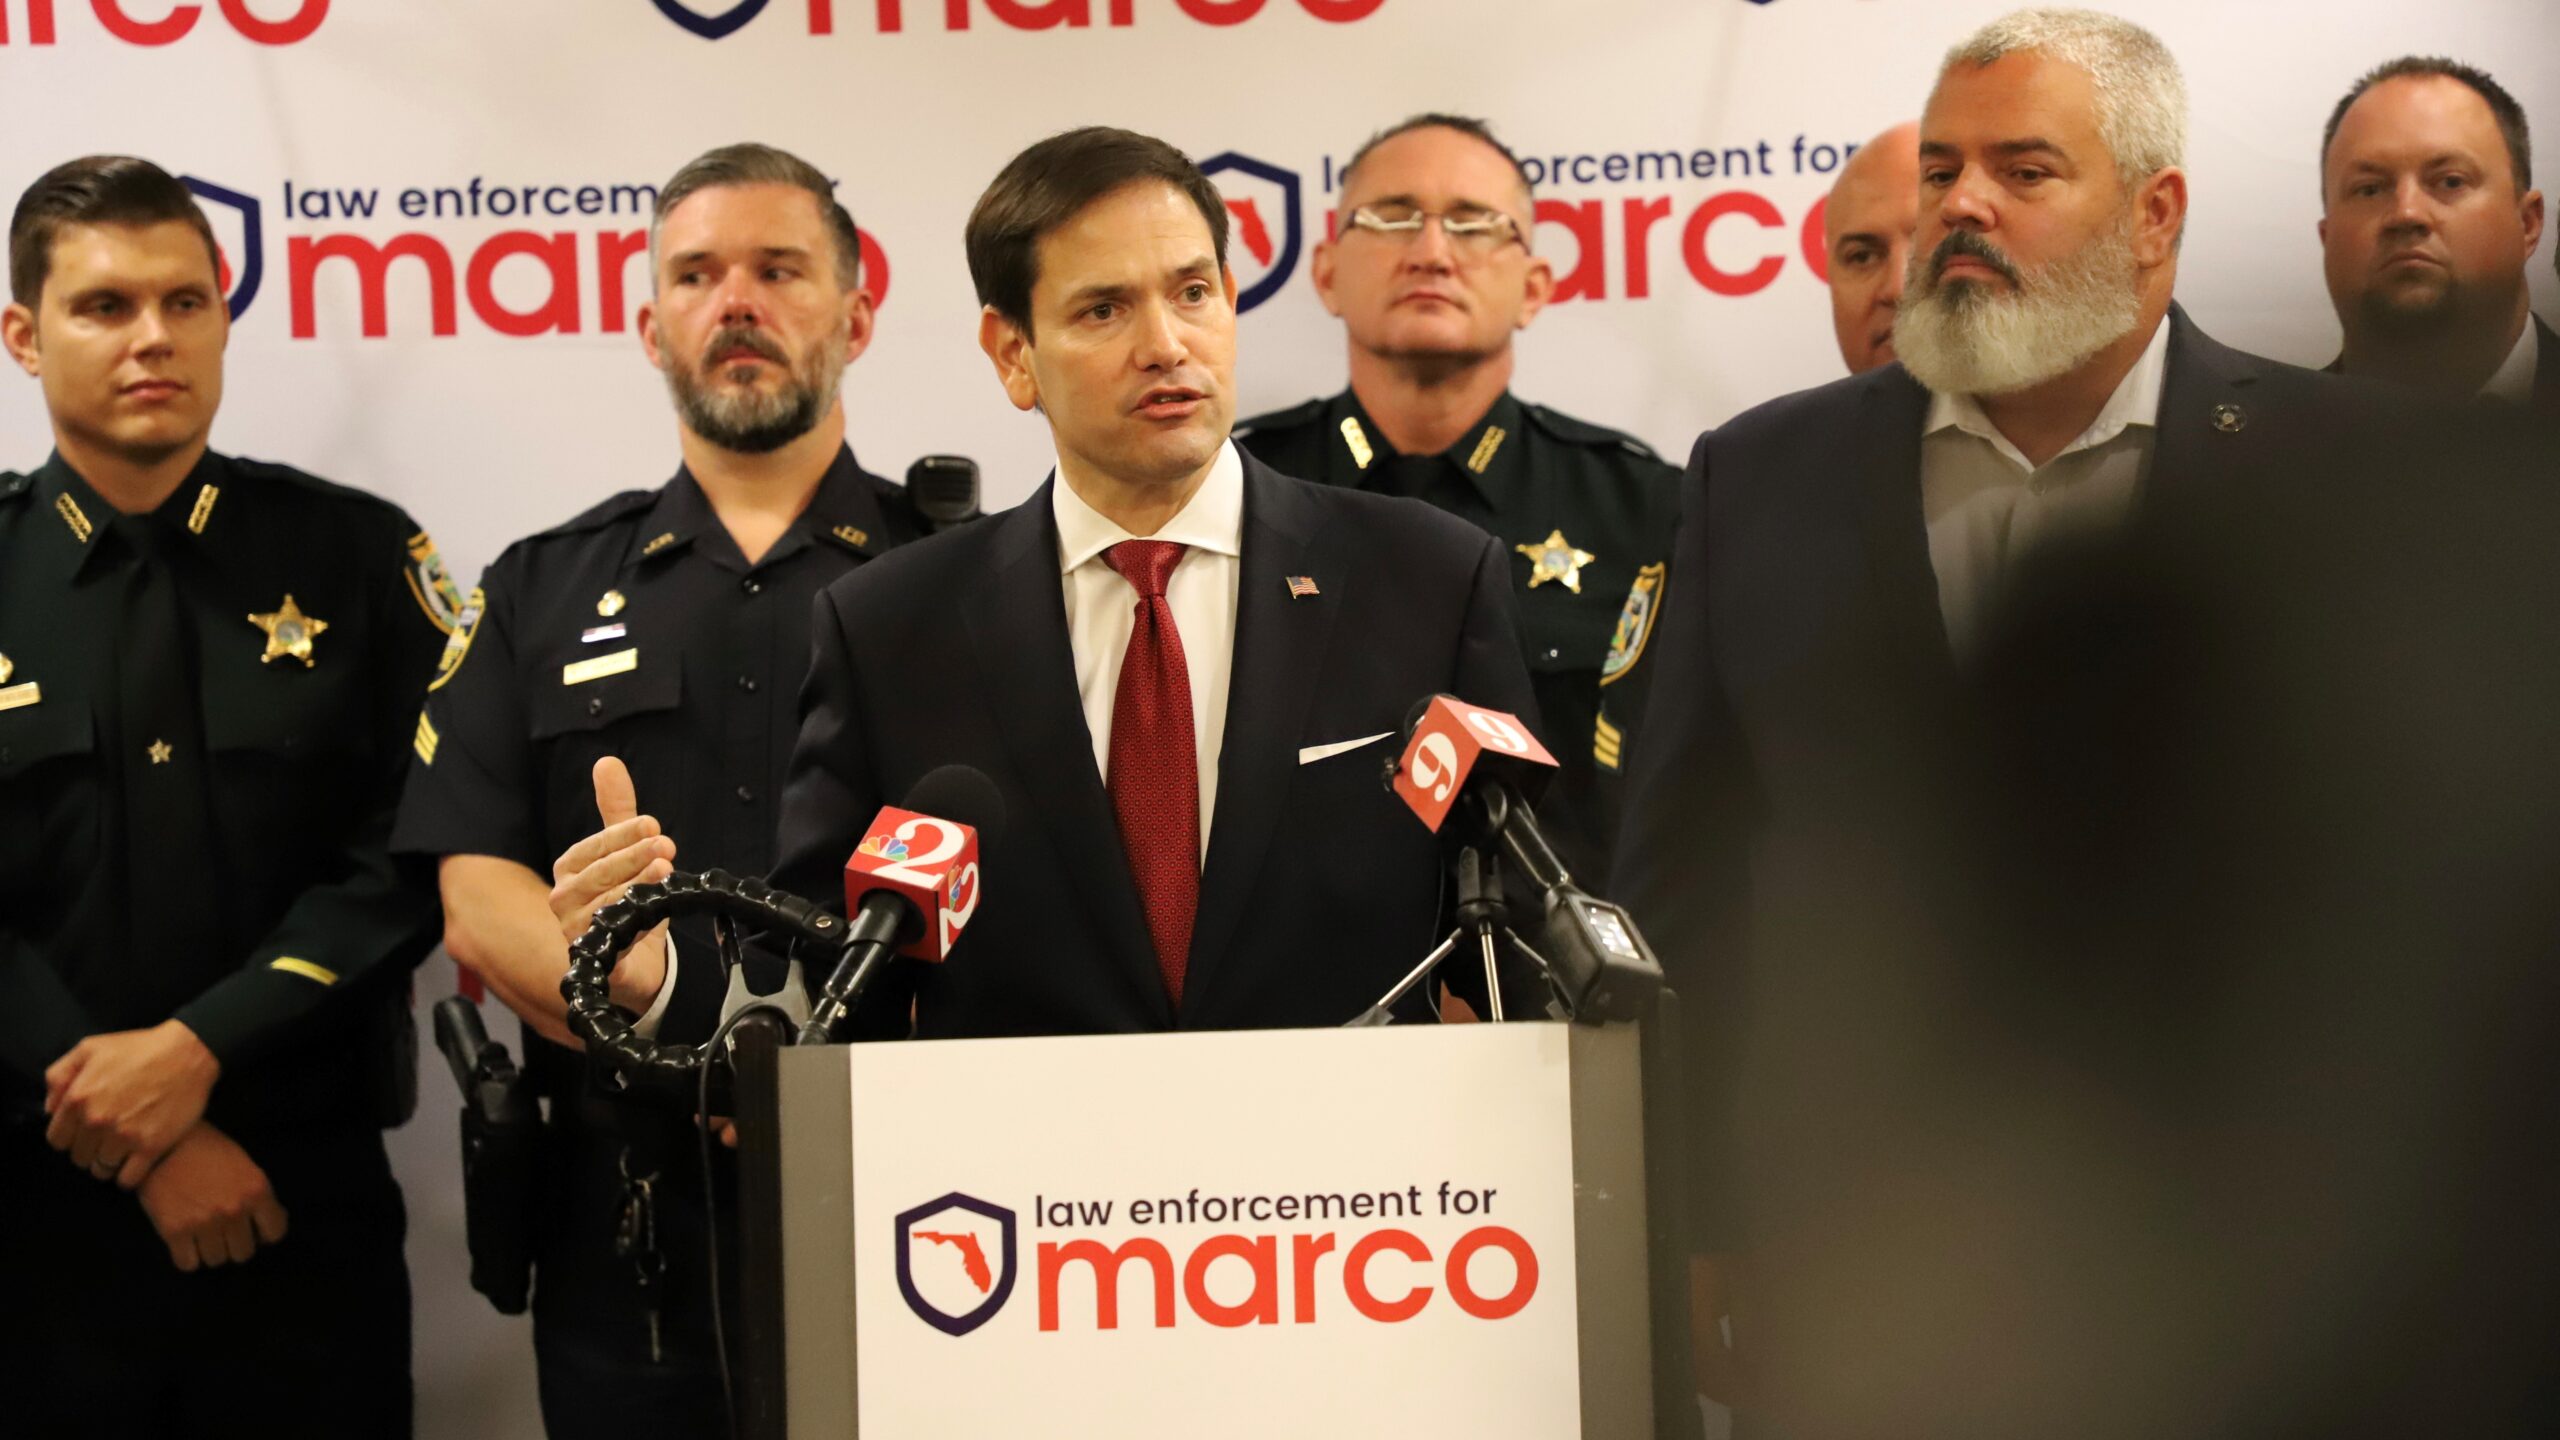 rubio-demings-florida-senate-battle-puts-crime-and-policing-front-and-center